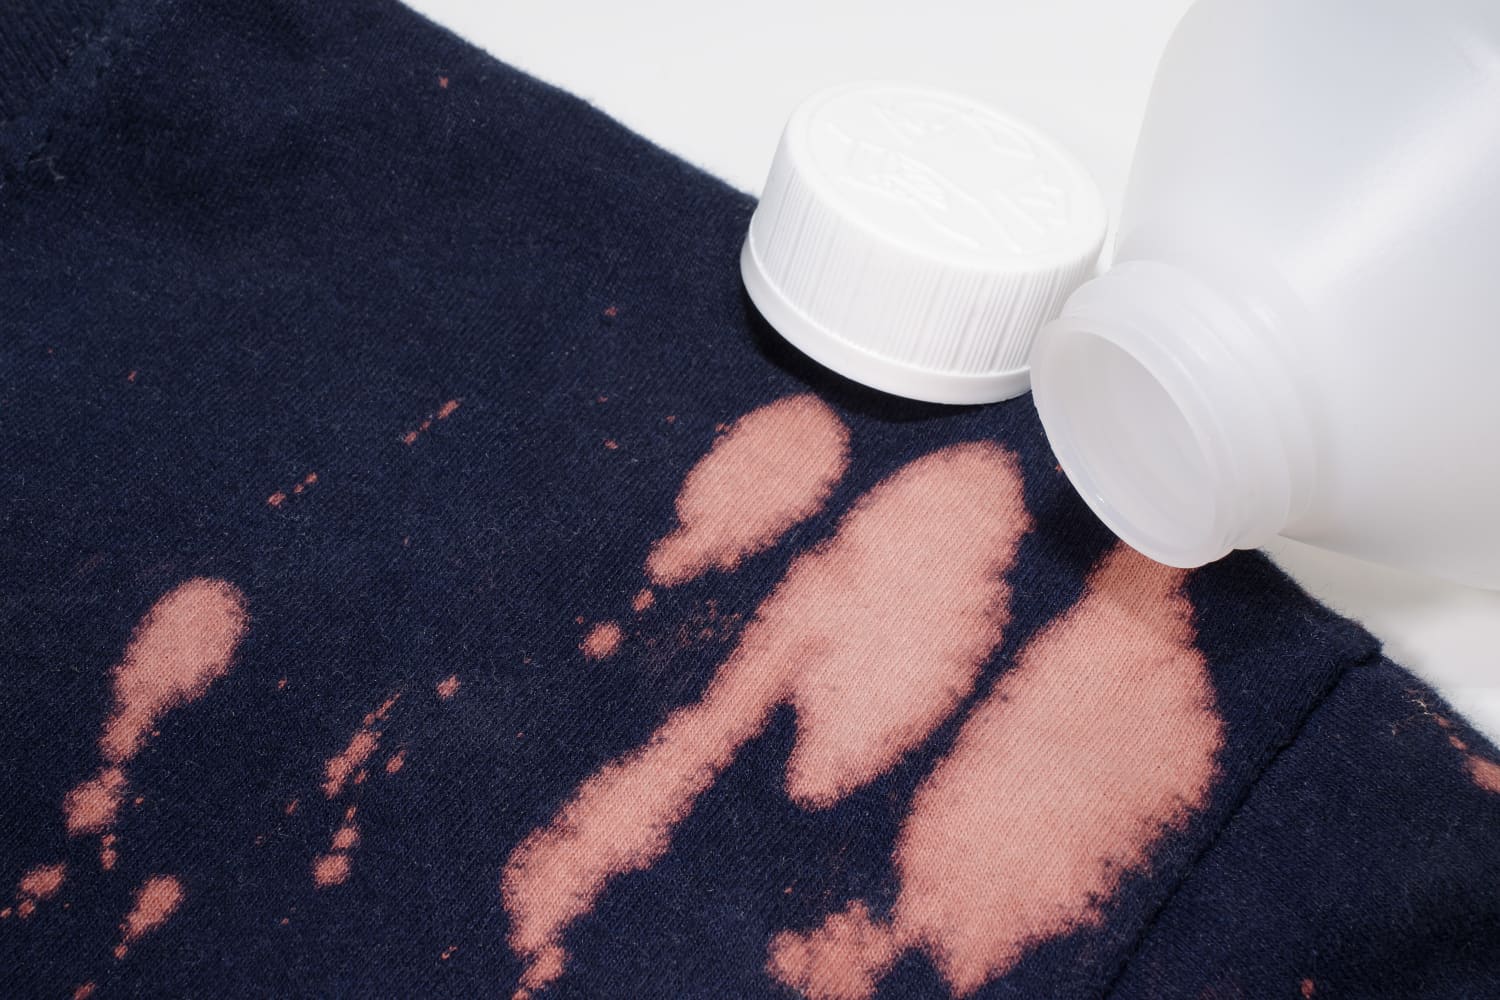 How to Get Bleach Stains Out of Clothes: 5 Remedies to Try